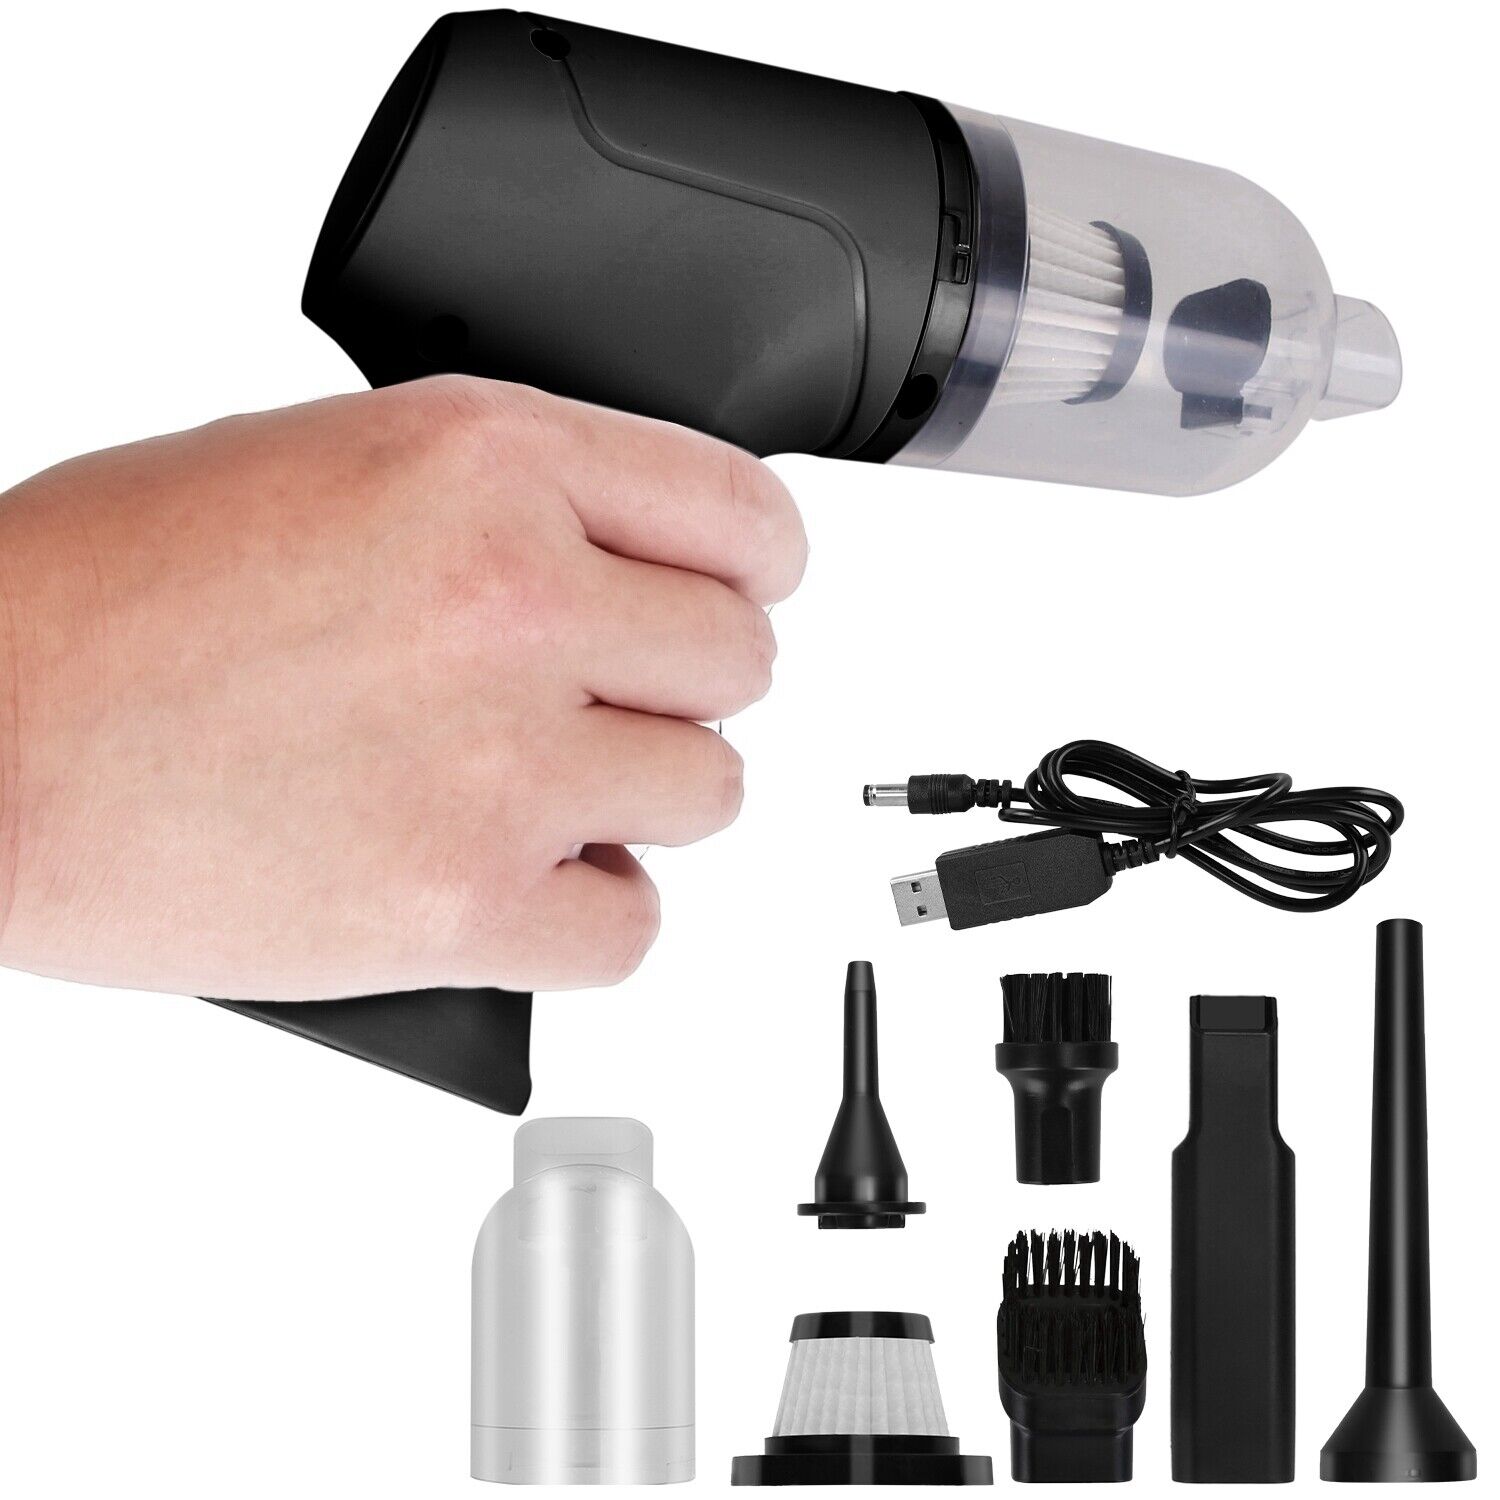 Cordless Handheld Vacuum Cleaner Accessories Kit Mini Portable for Car Auto Home